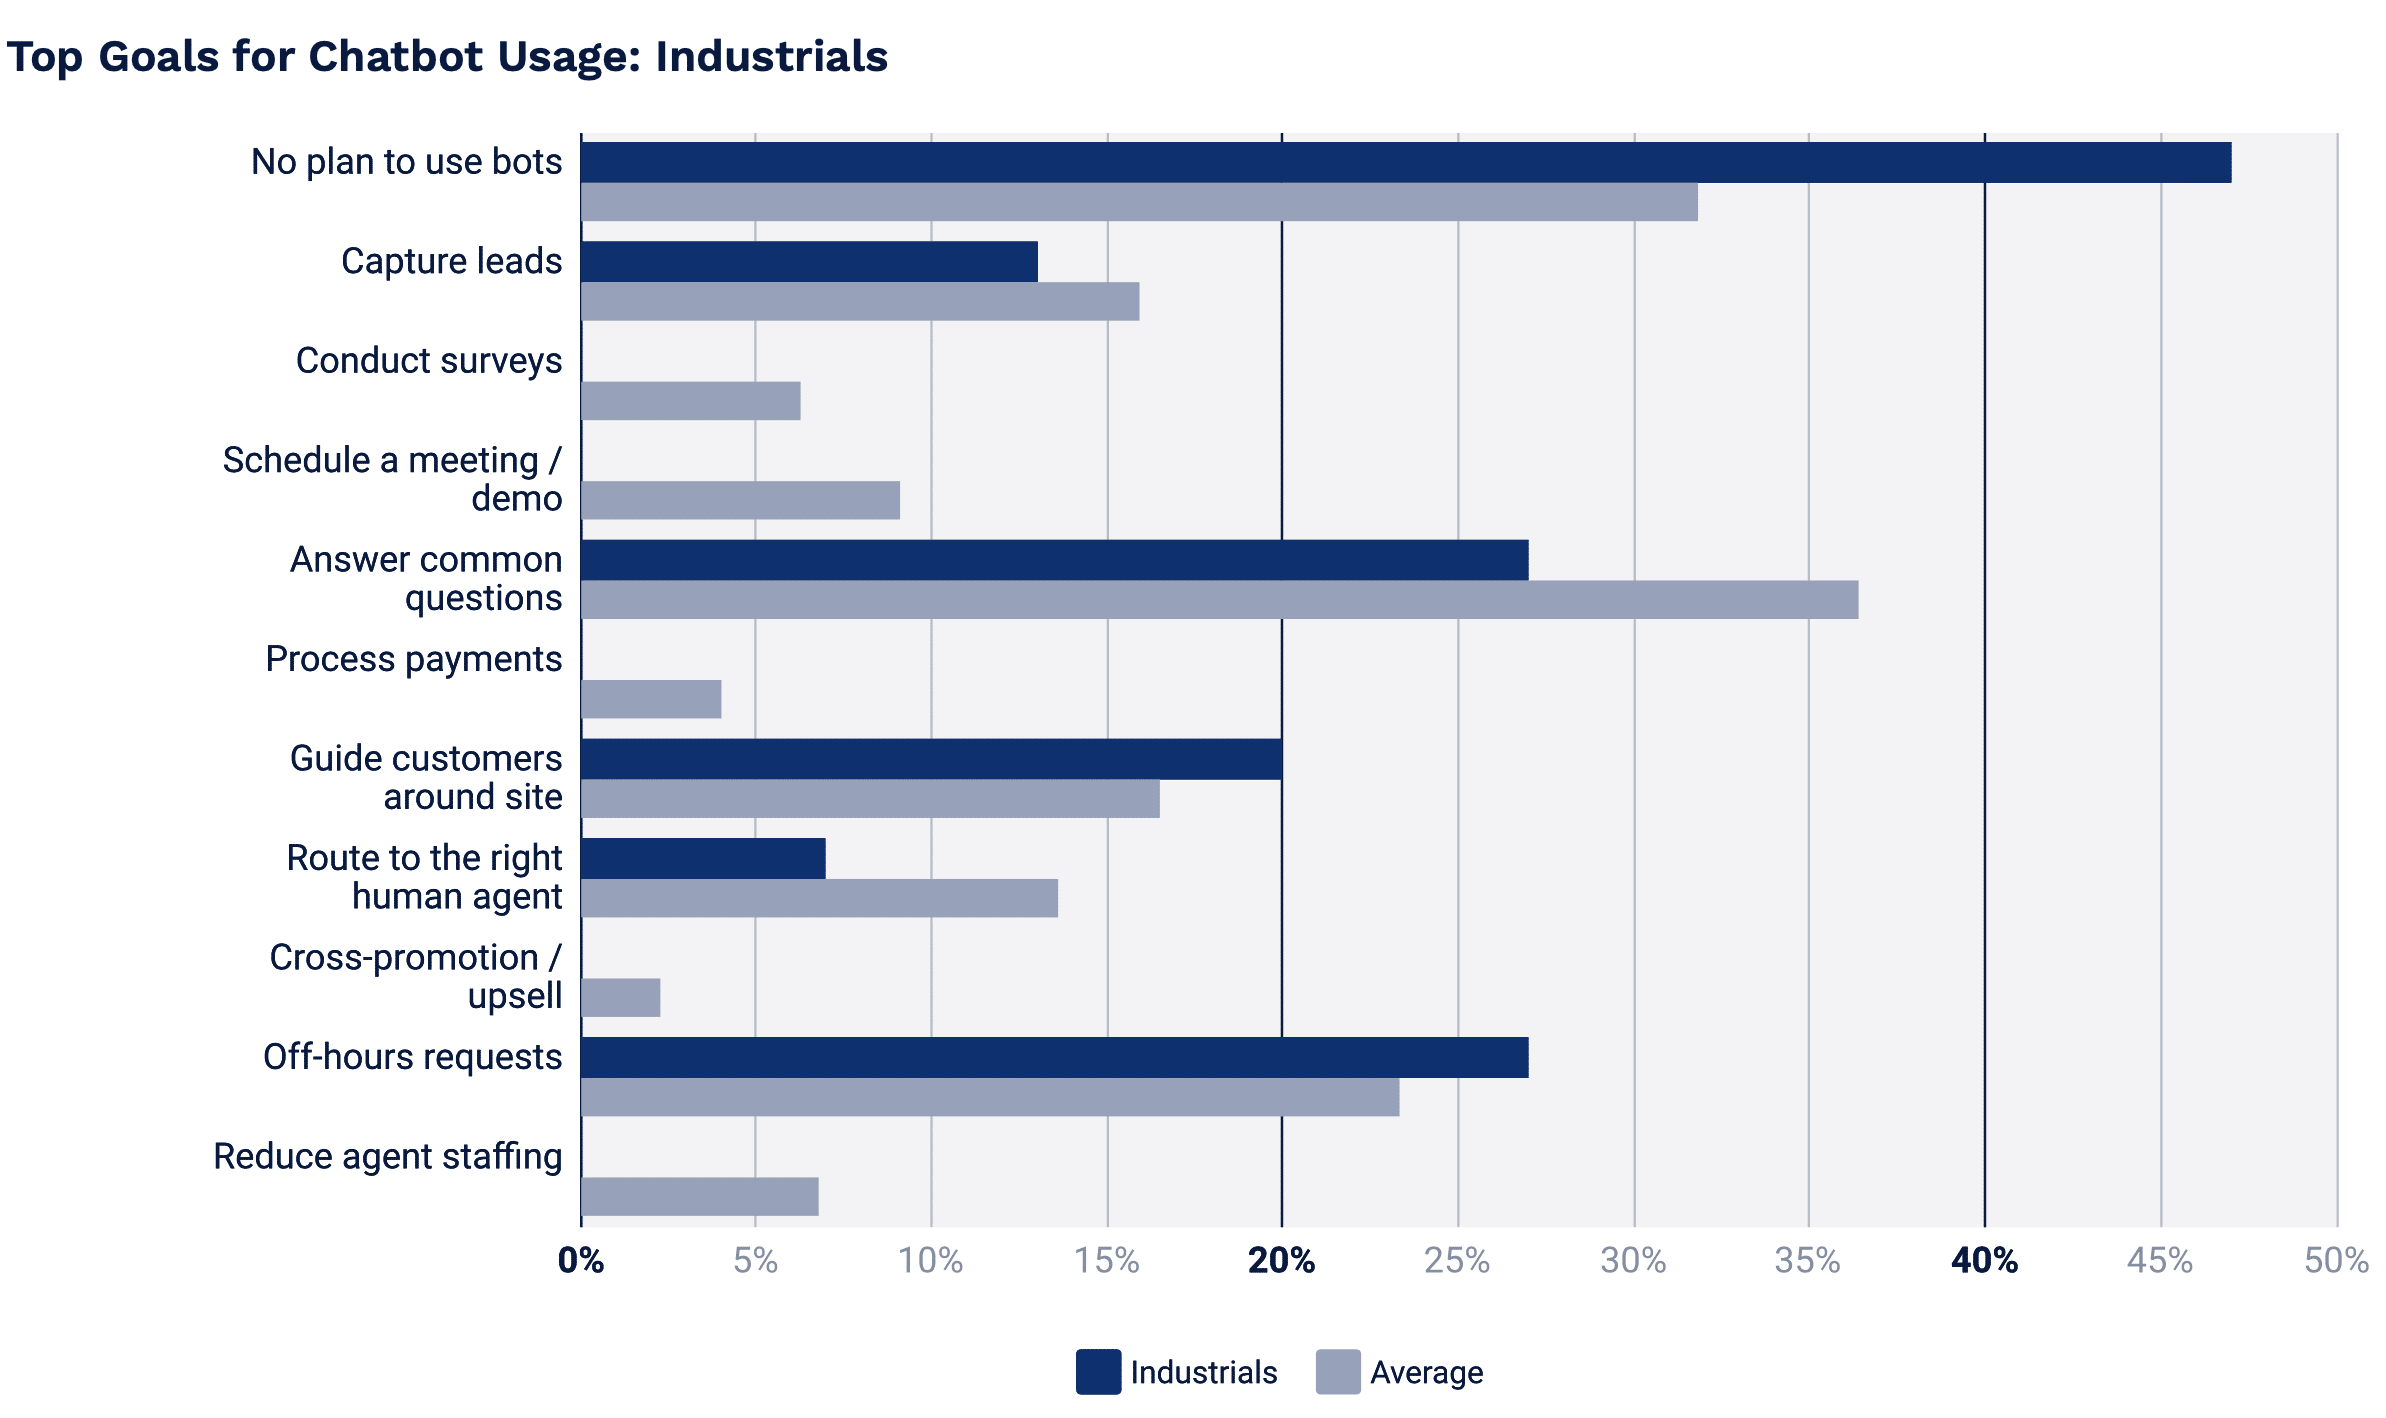 Top goals for chatbot usage - Industrial sector